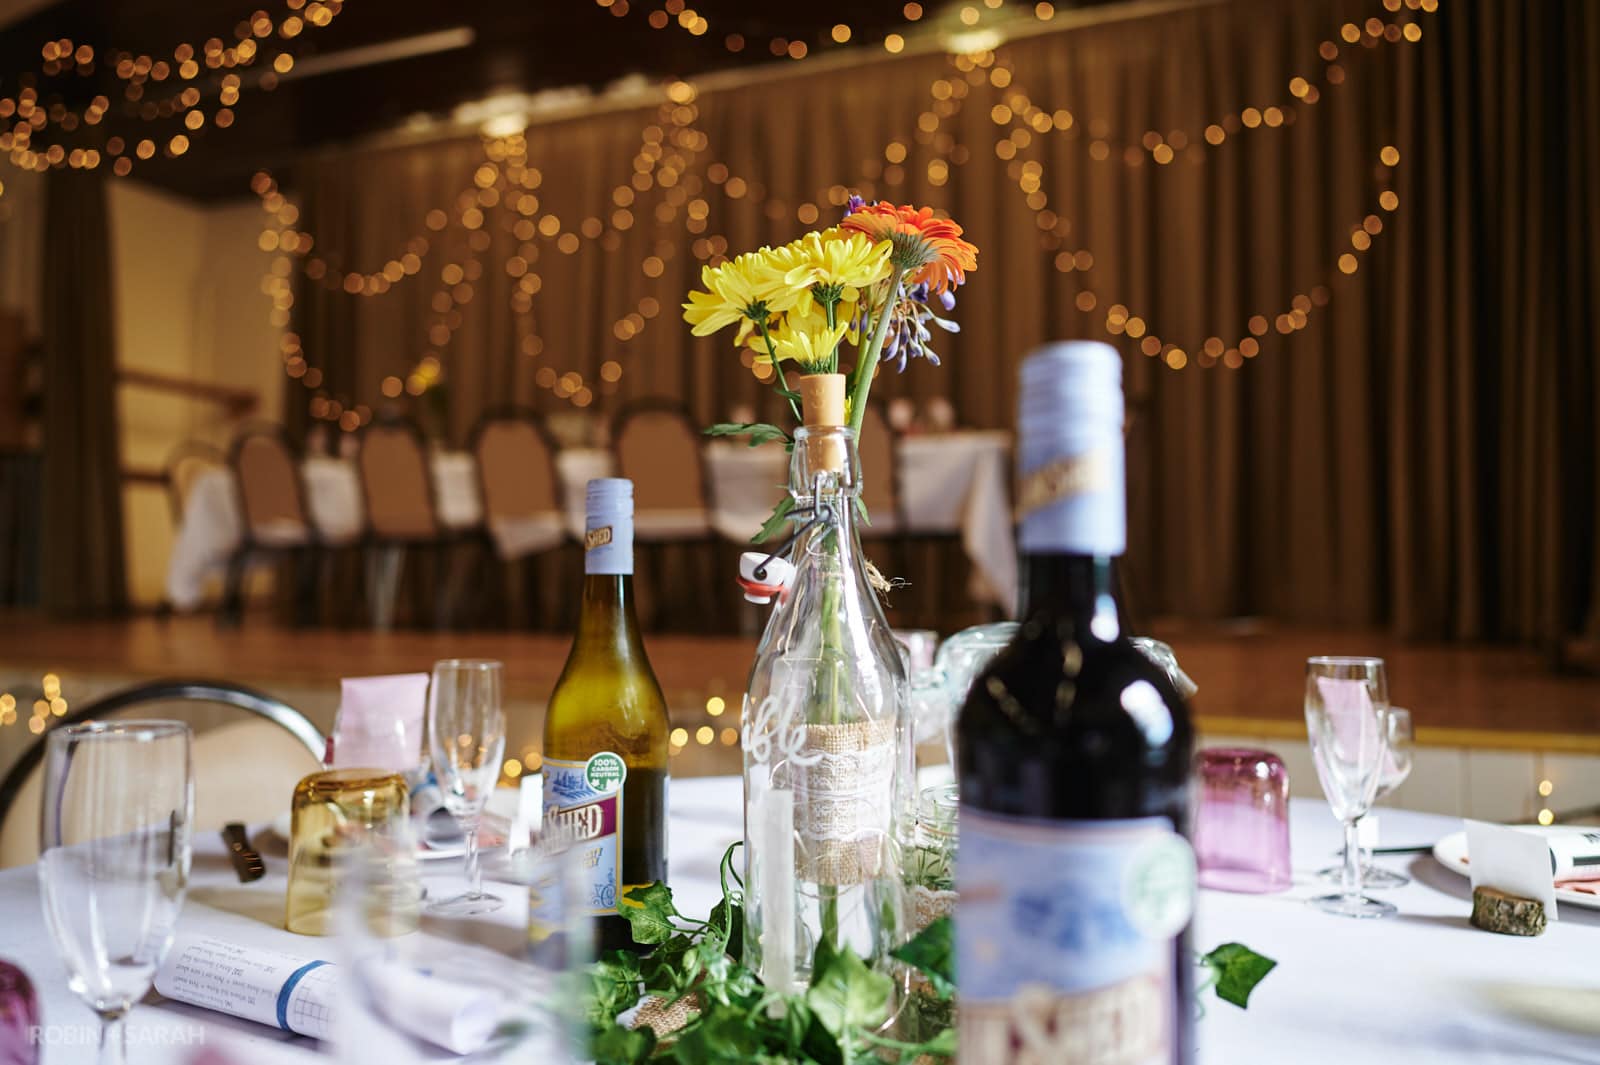 Flowers and bottles of wine on table for wedding meal in village hall